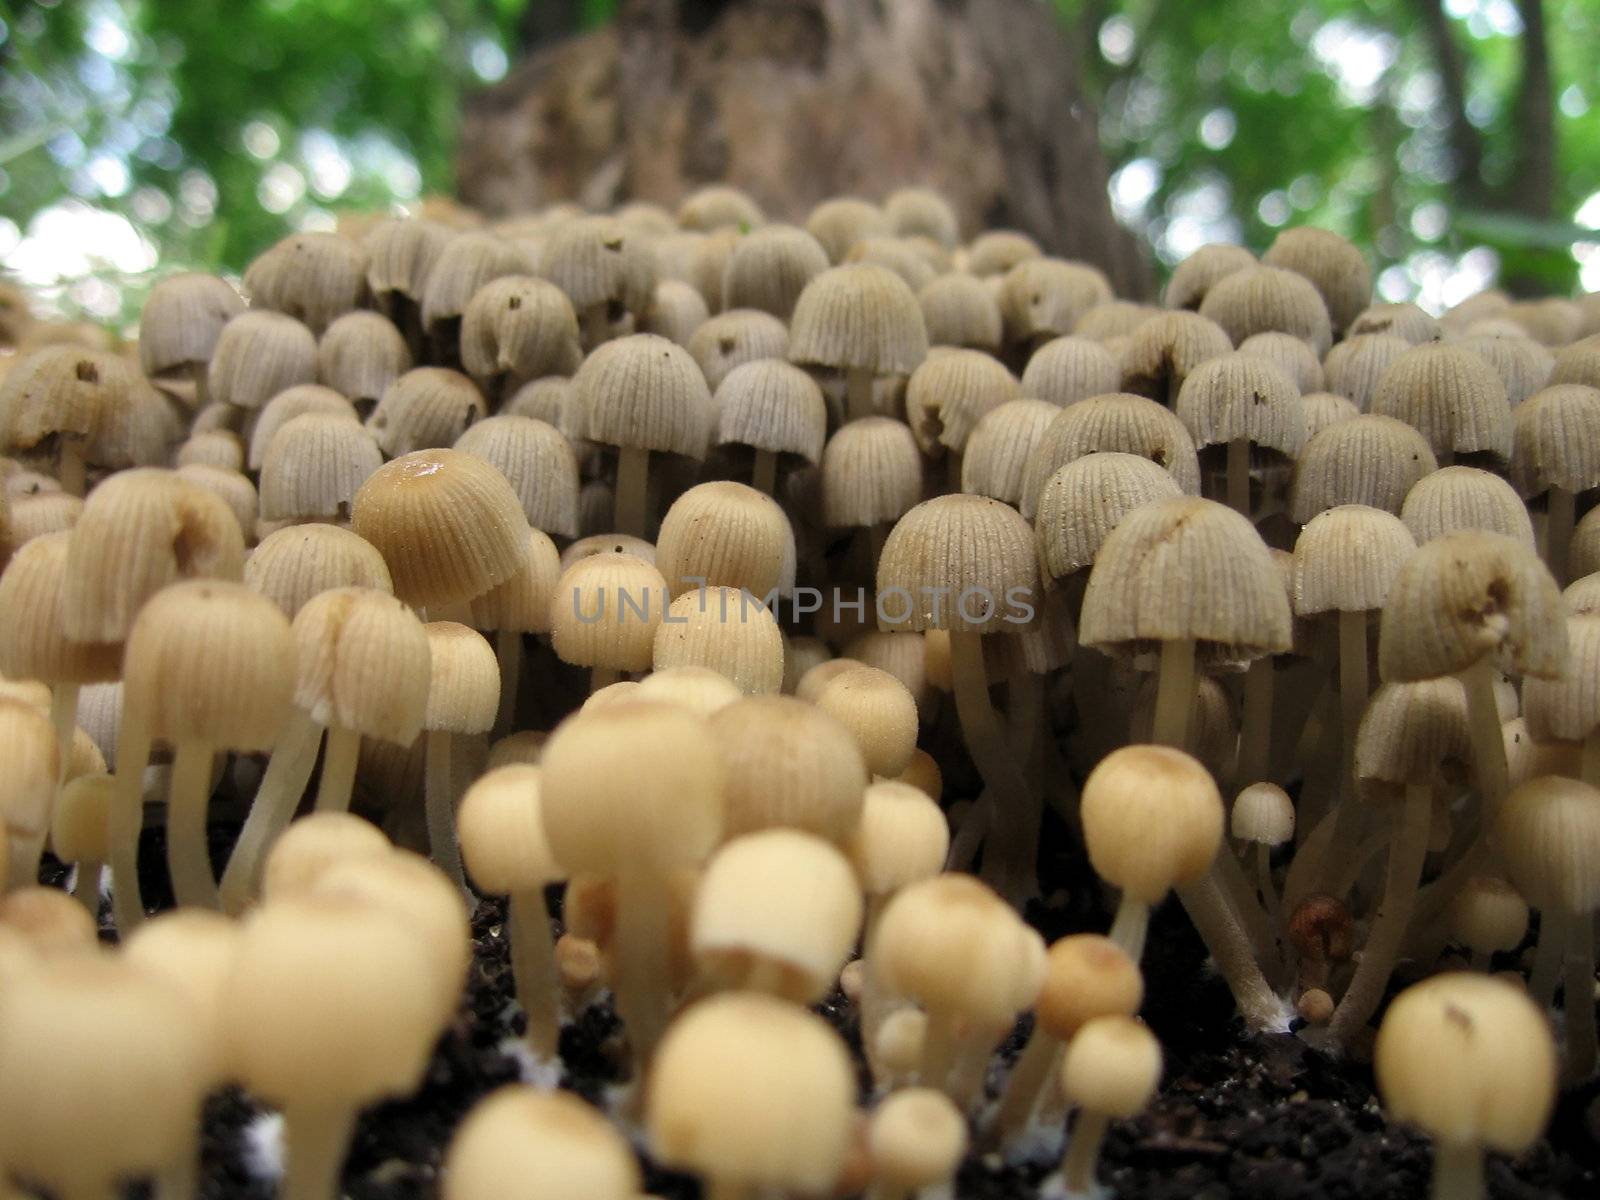 Mushrooms by tomatto